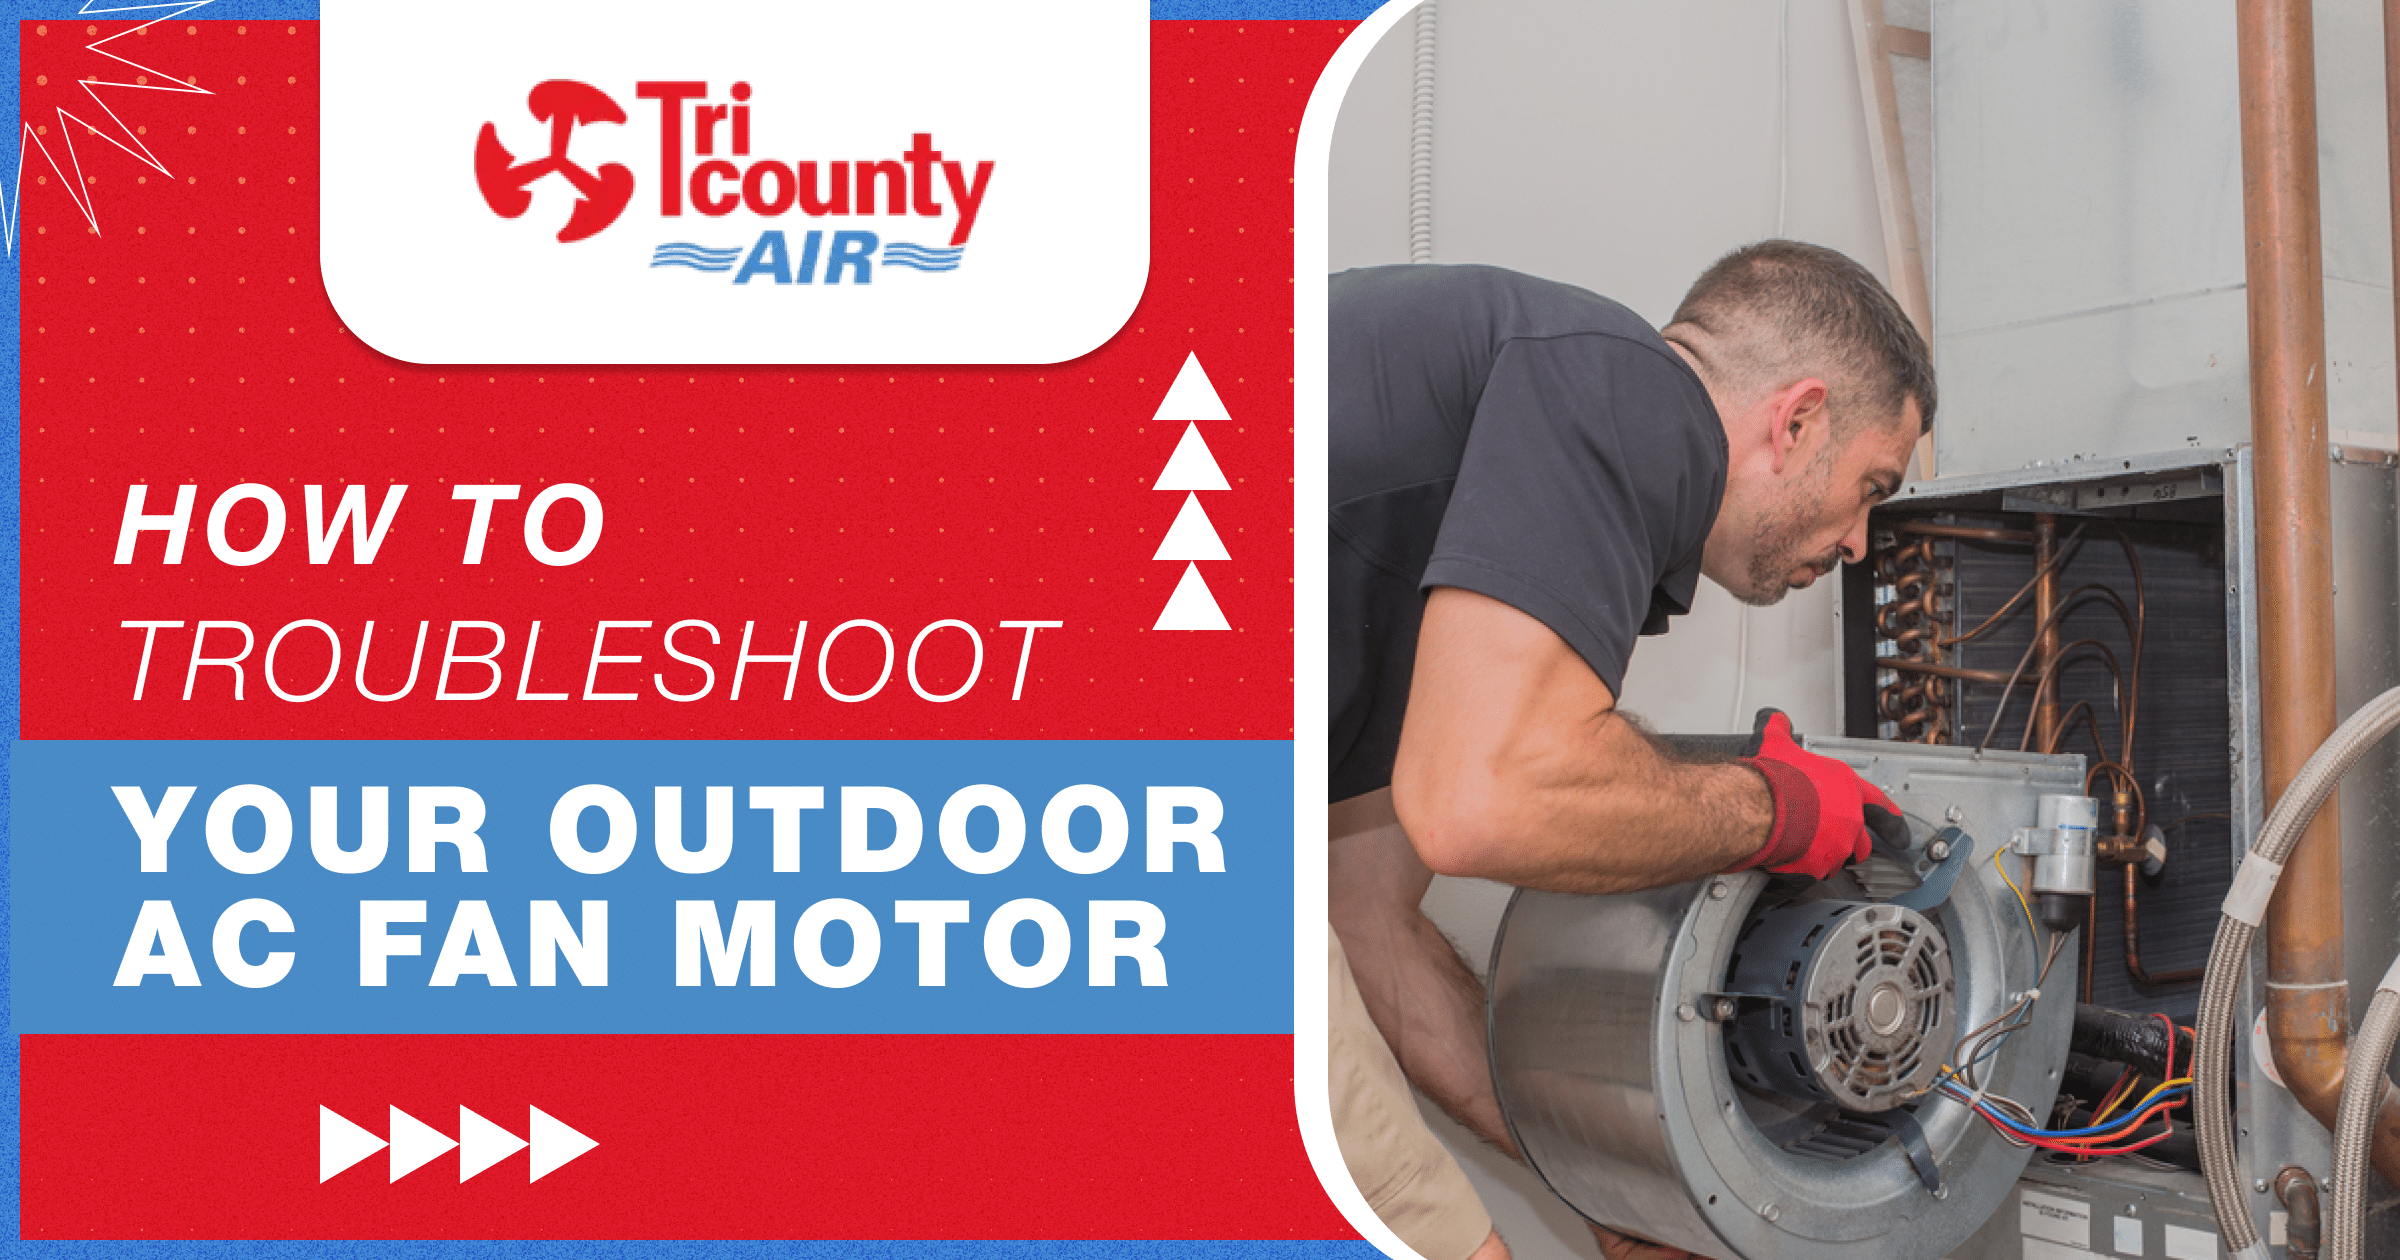 How to Troubleshoot Your Outdoor AC Fan Motor